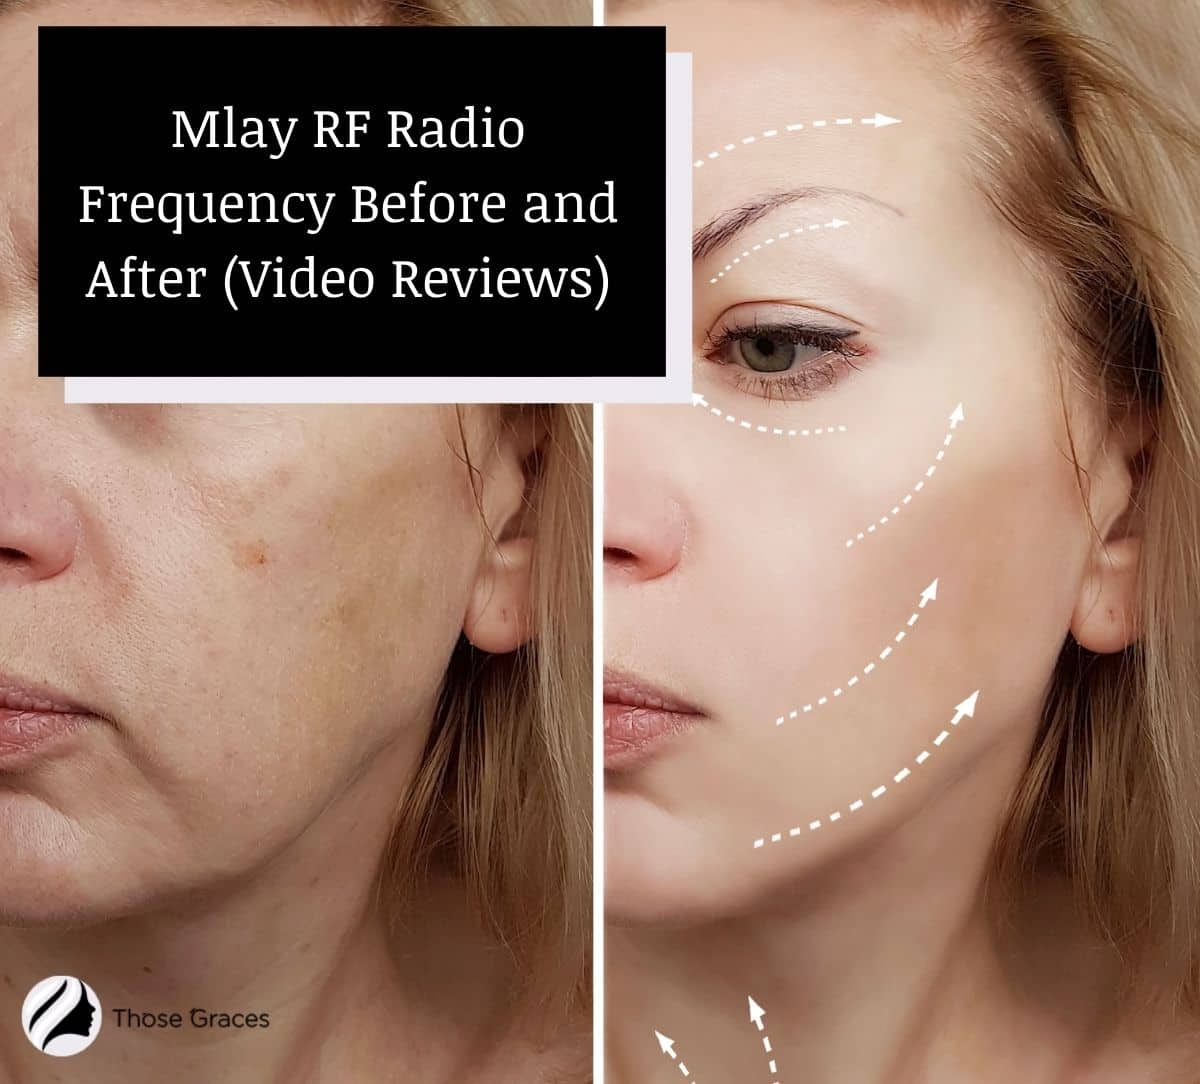 mlay rf radio frequency before and after photo of a lady